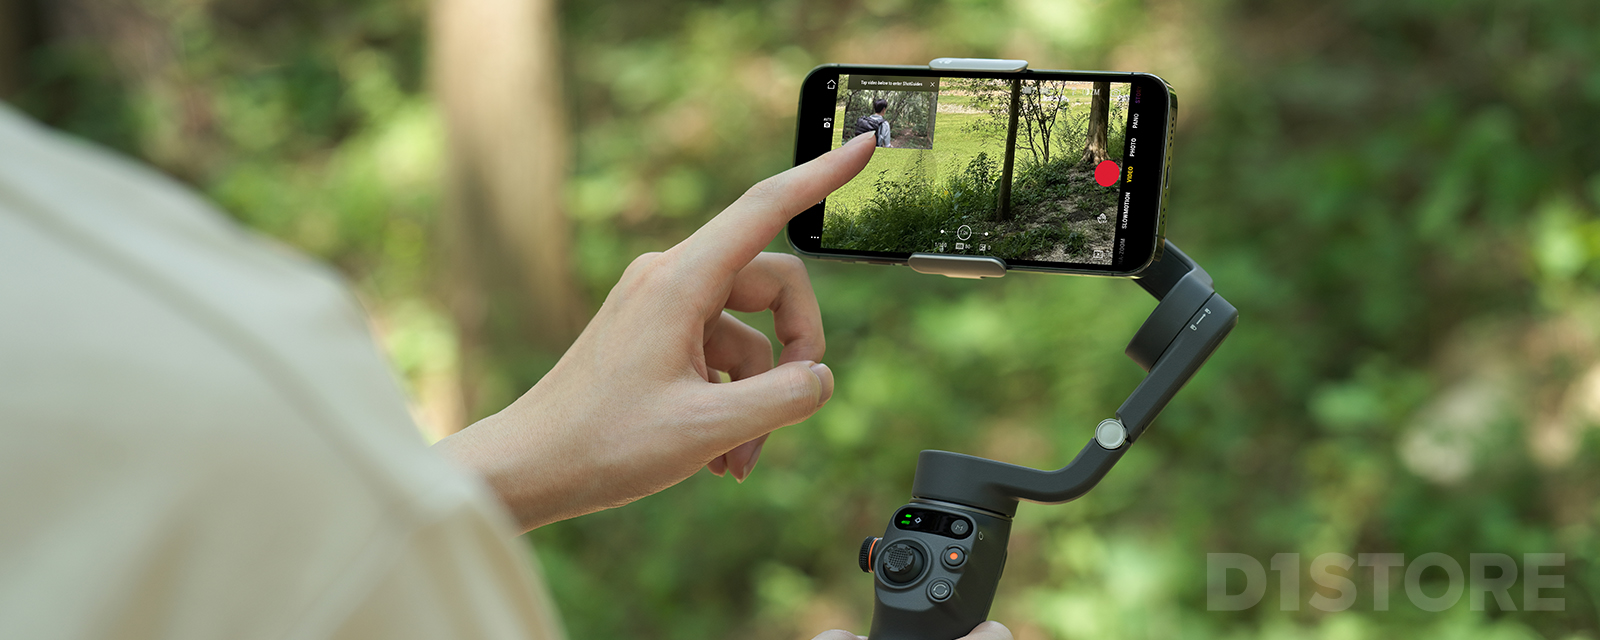 What Phones Work With DJI Osmo Mobile 6? | D1 Lounge